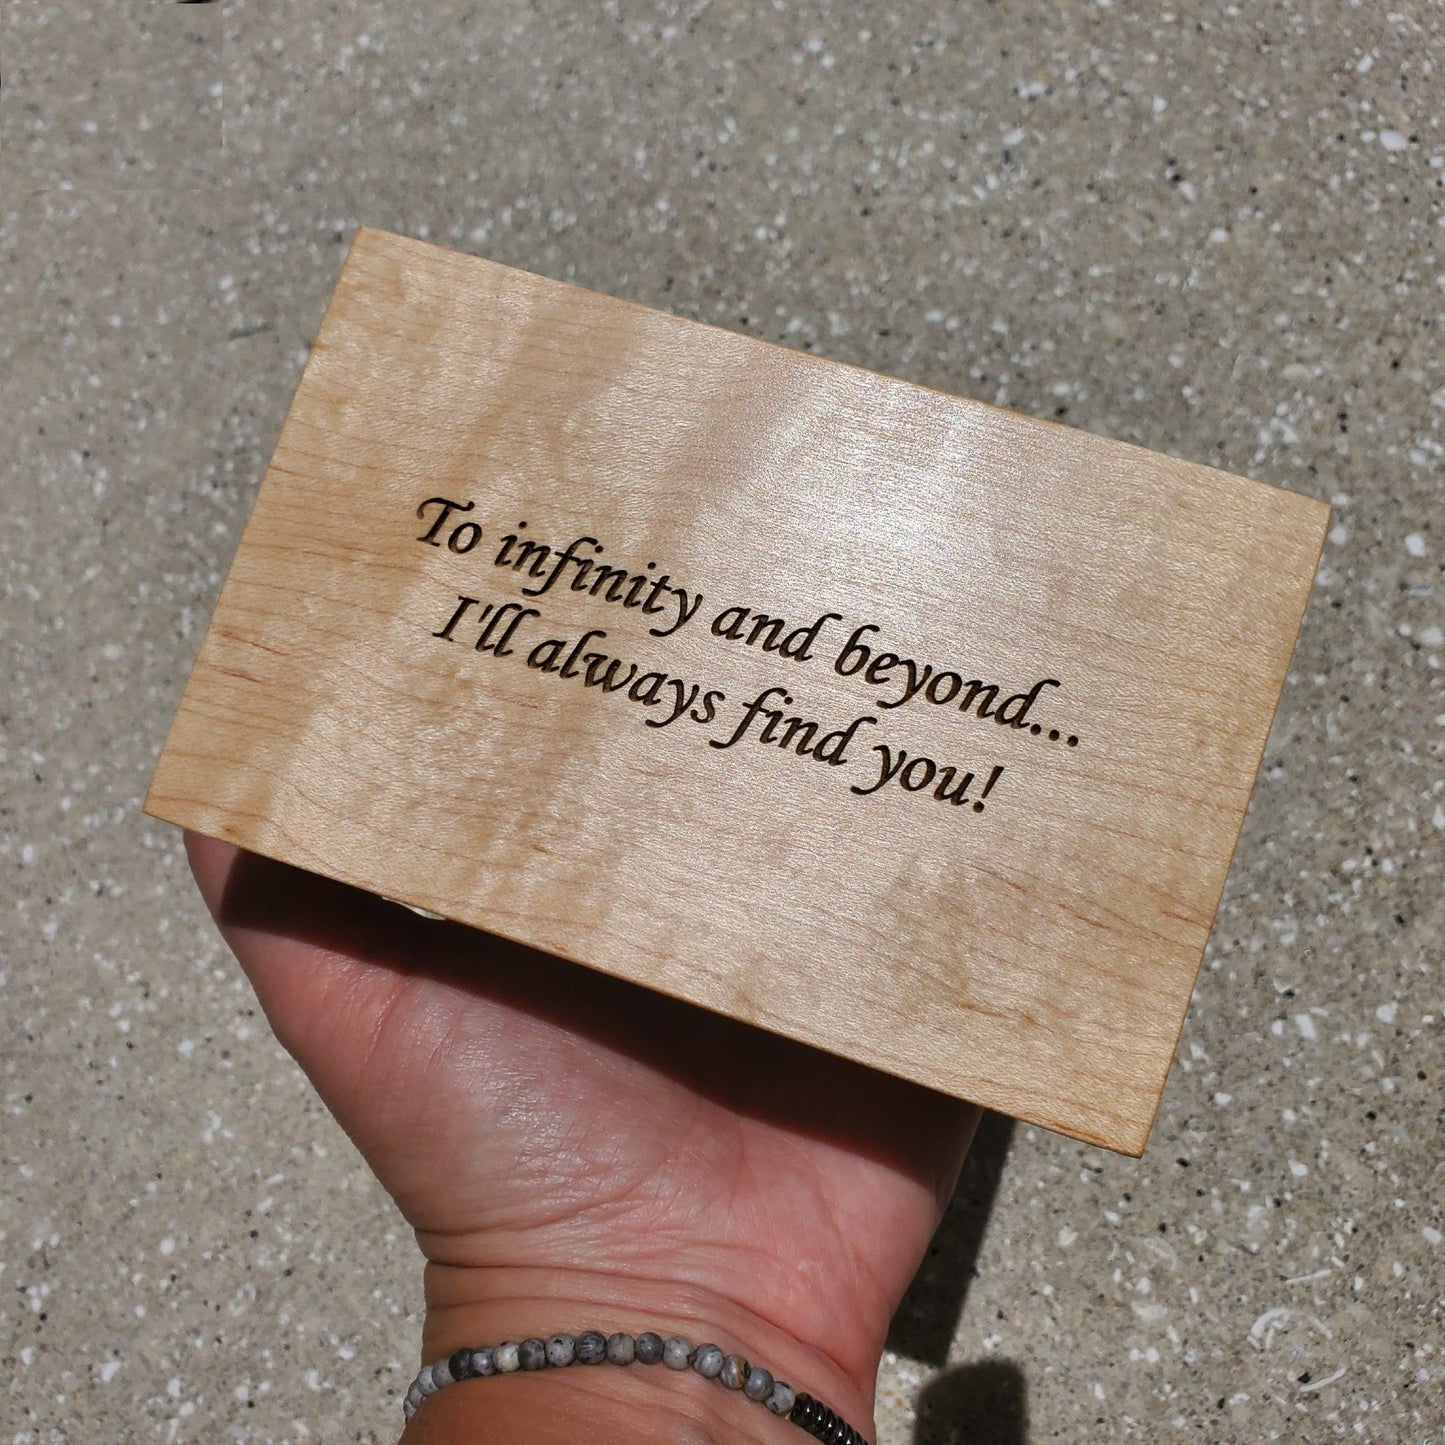 Personalized musical jewelry box with custom engraving